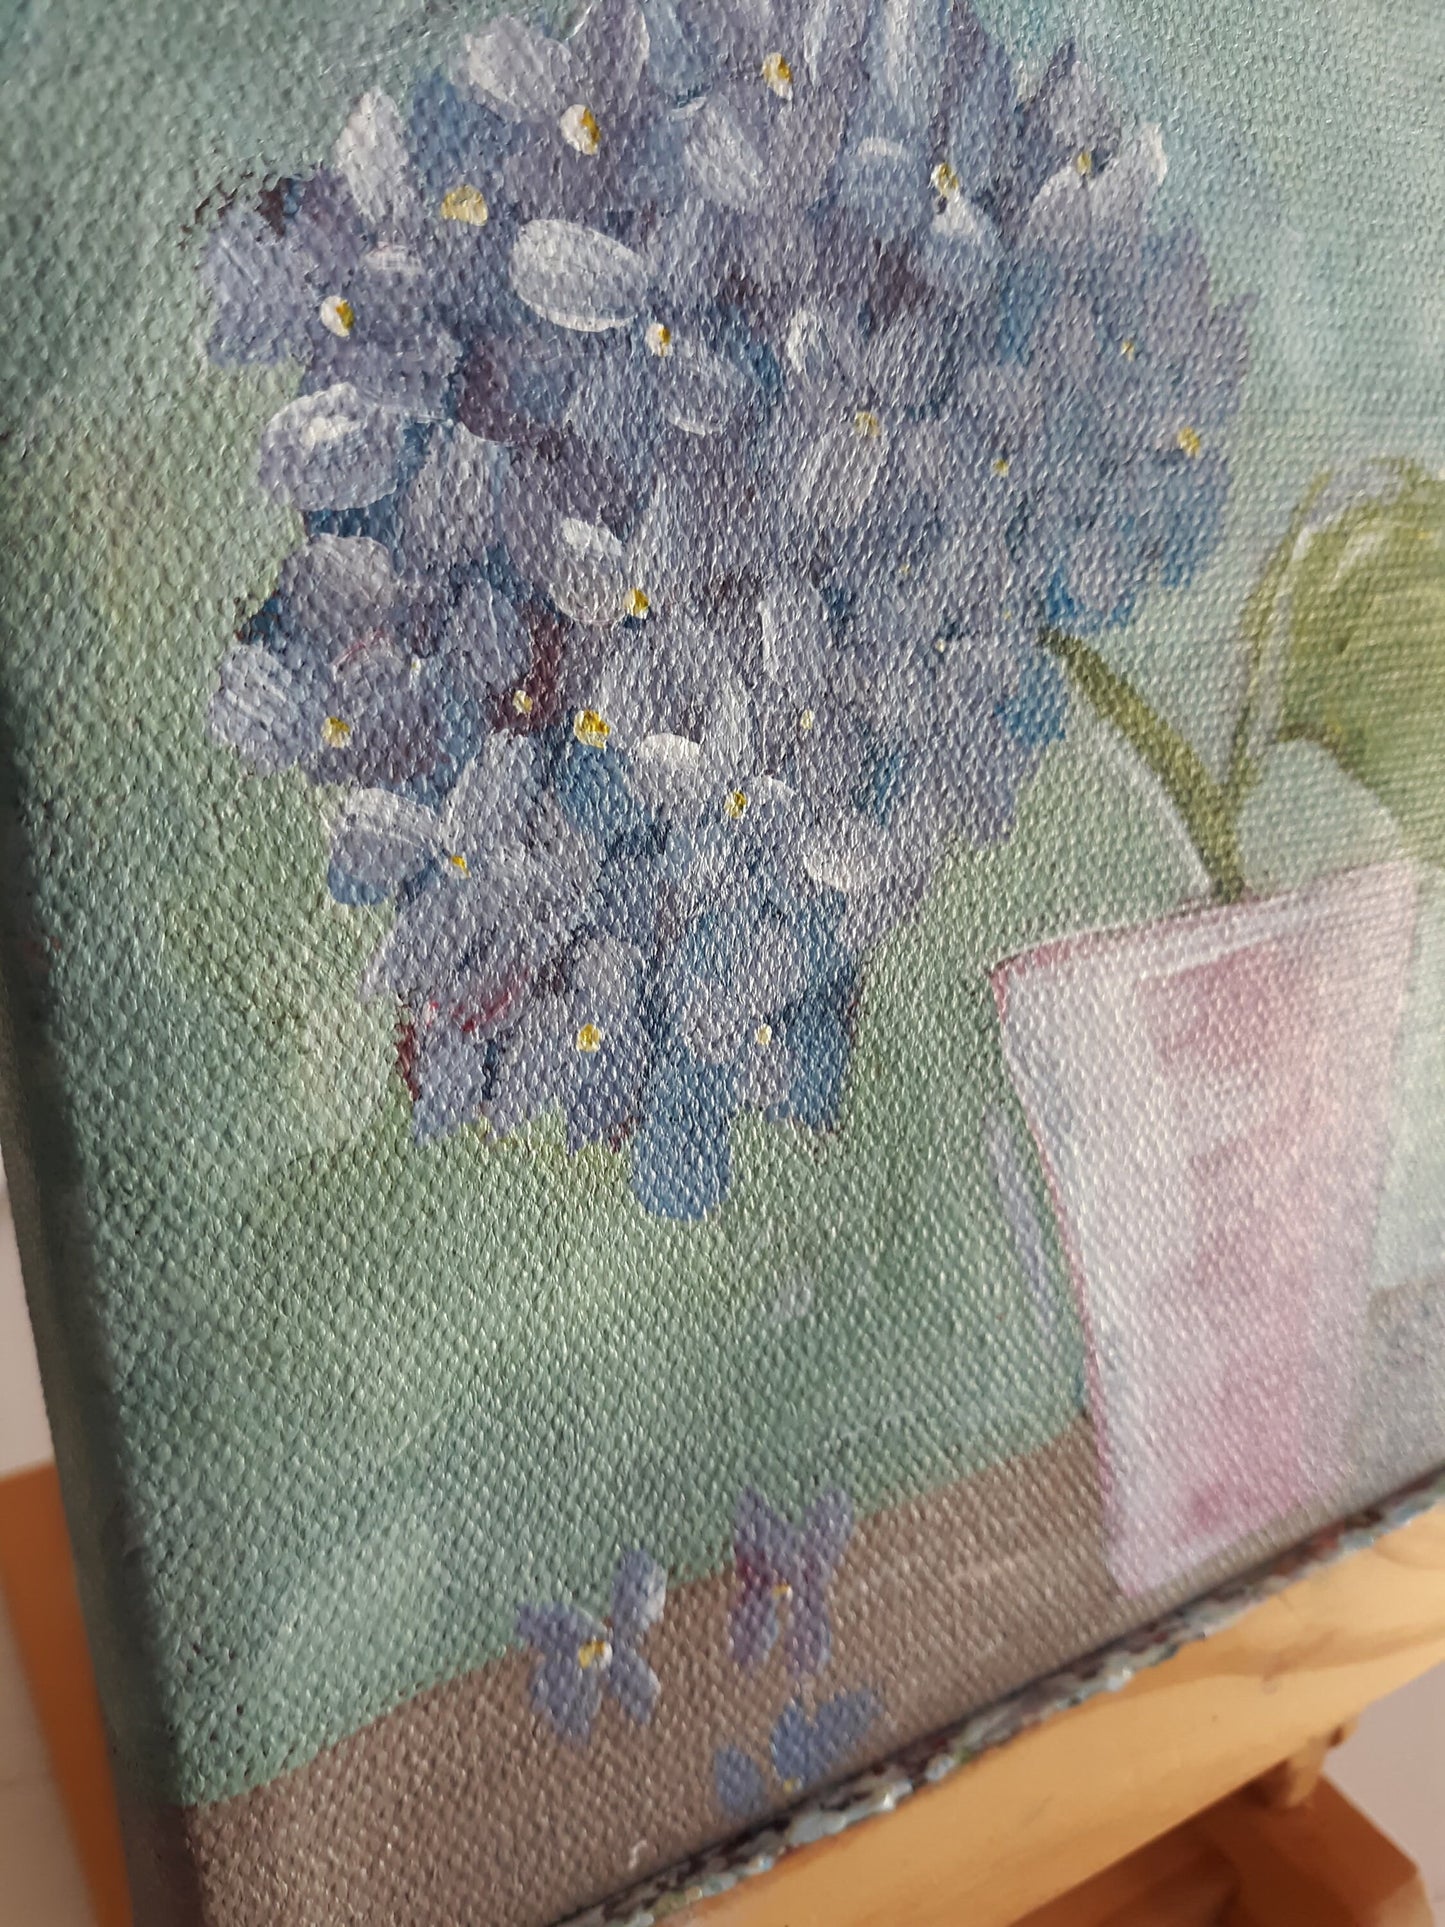 Gift From a Neighbor Floral Painting